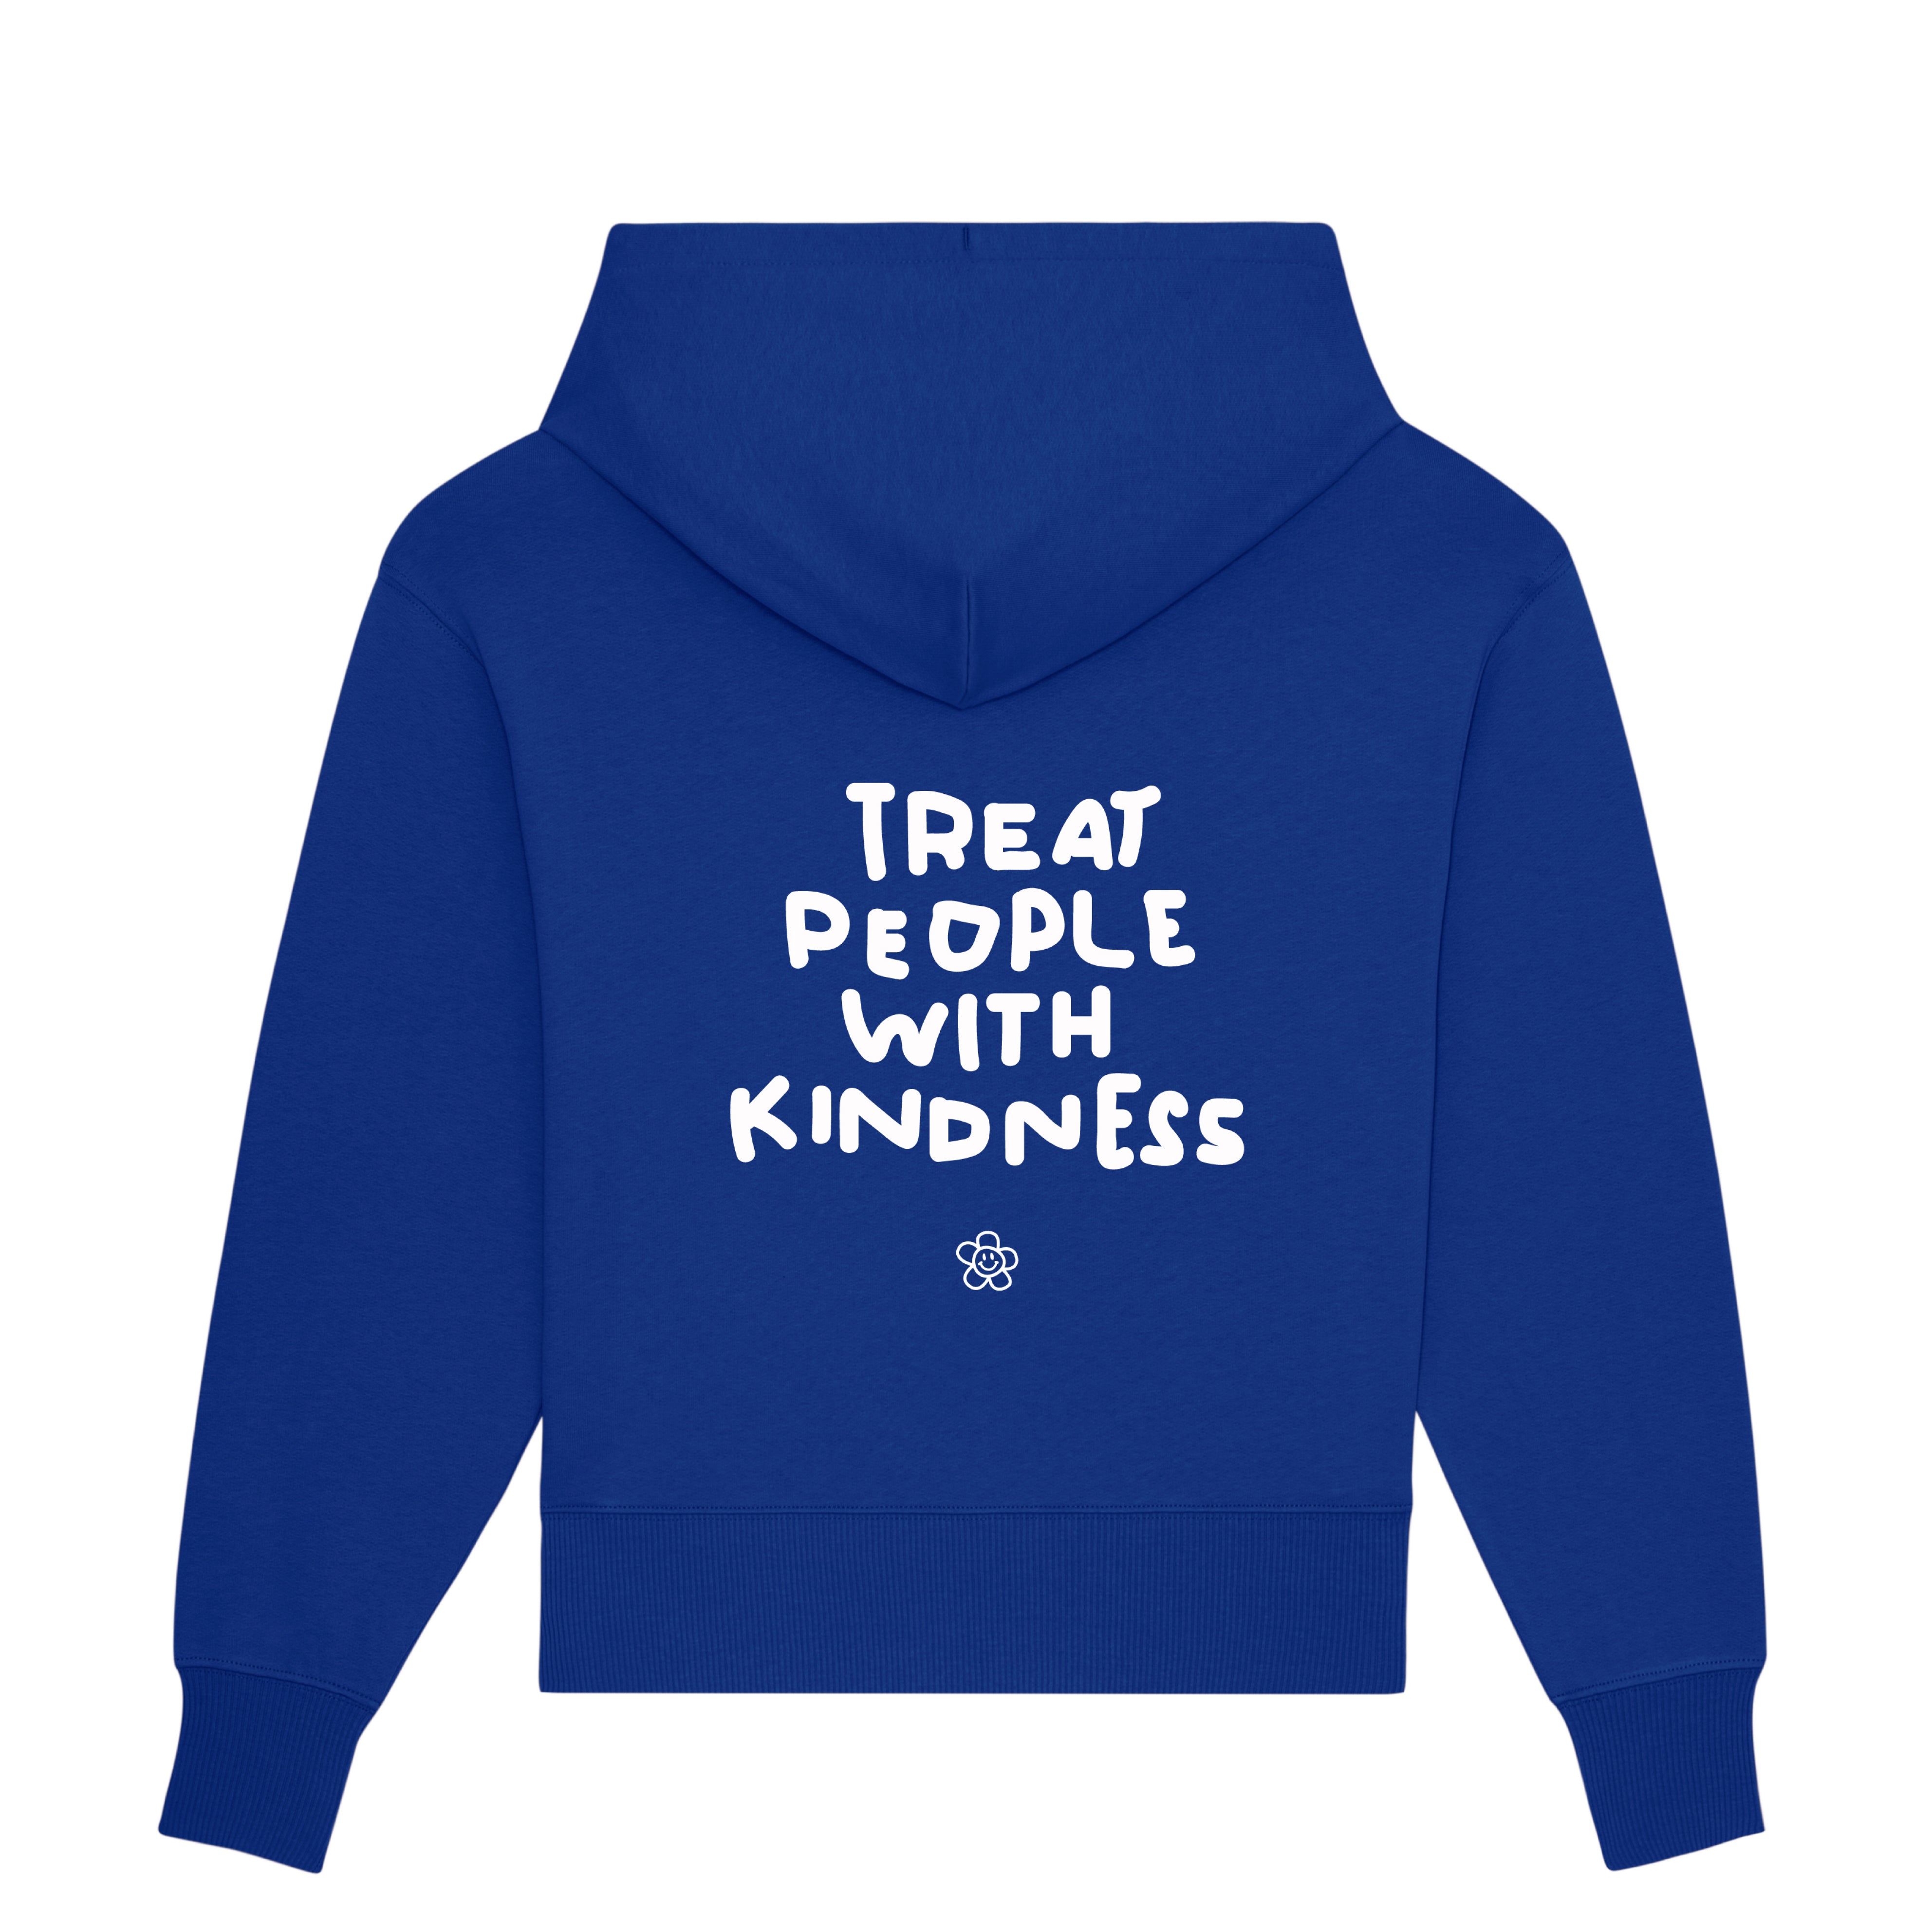 TREAT PEOPLE WITH KINDNESS ROYAL BLUE HOODIE